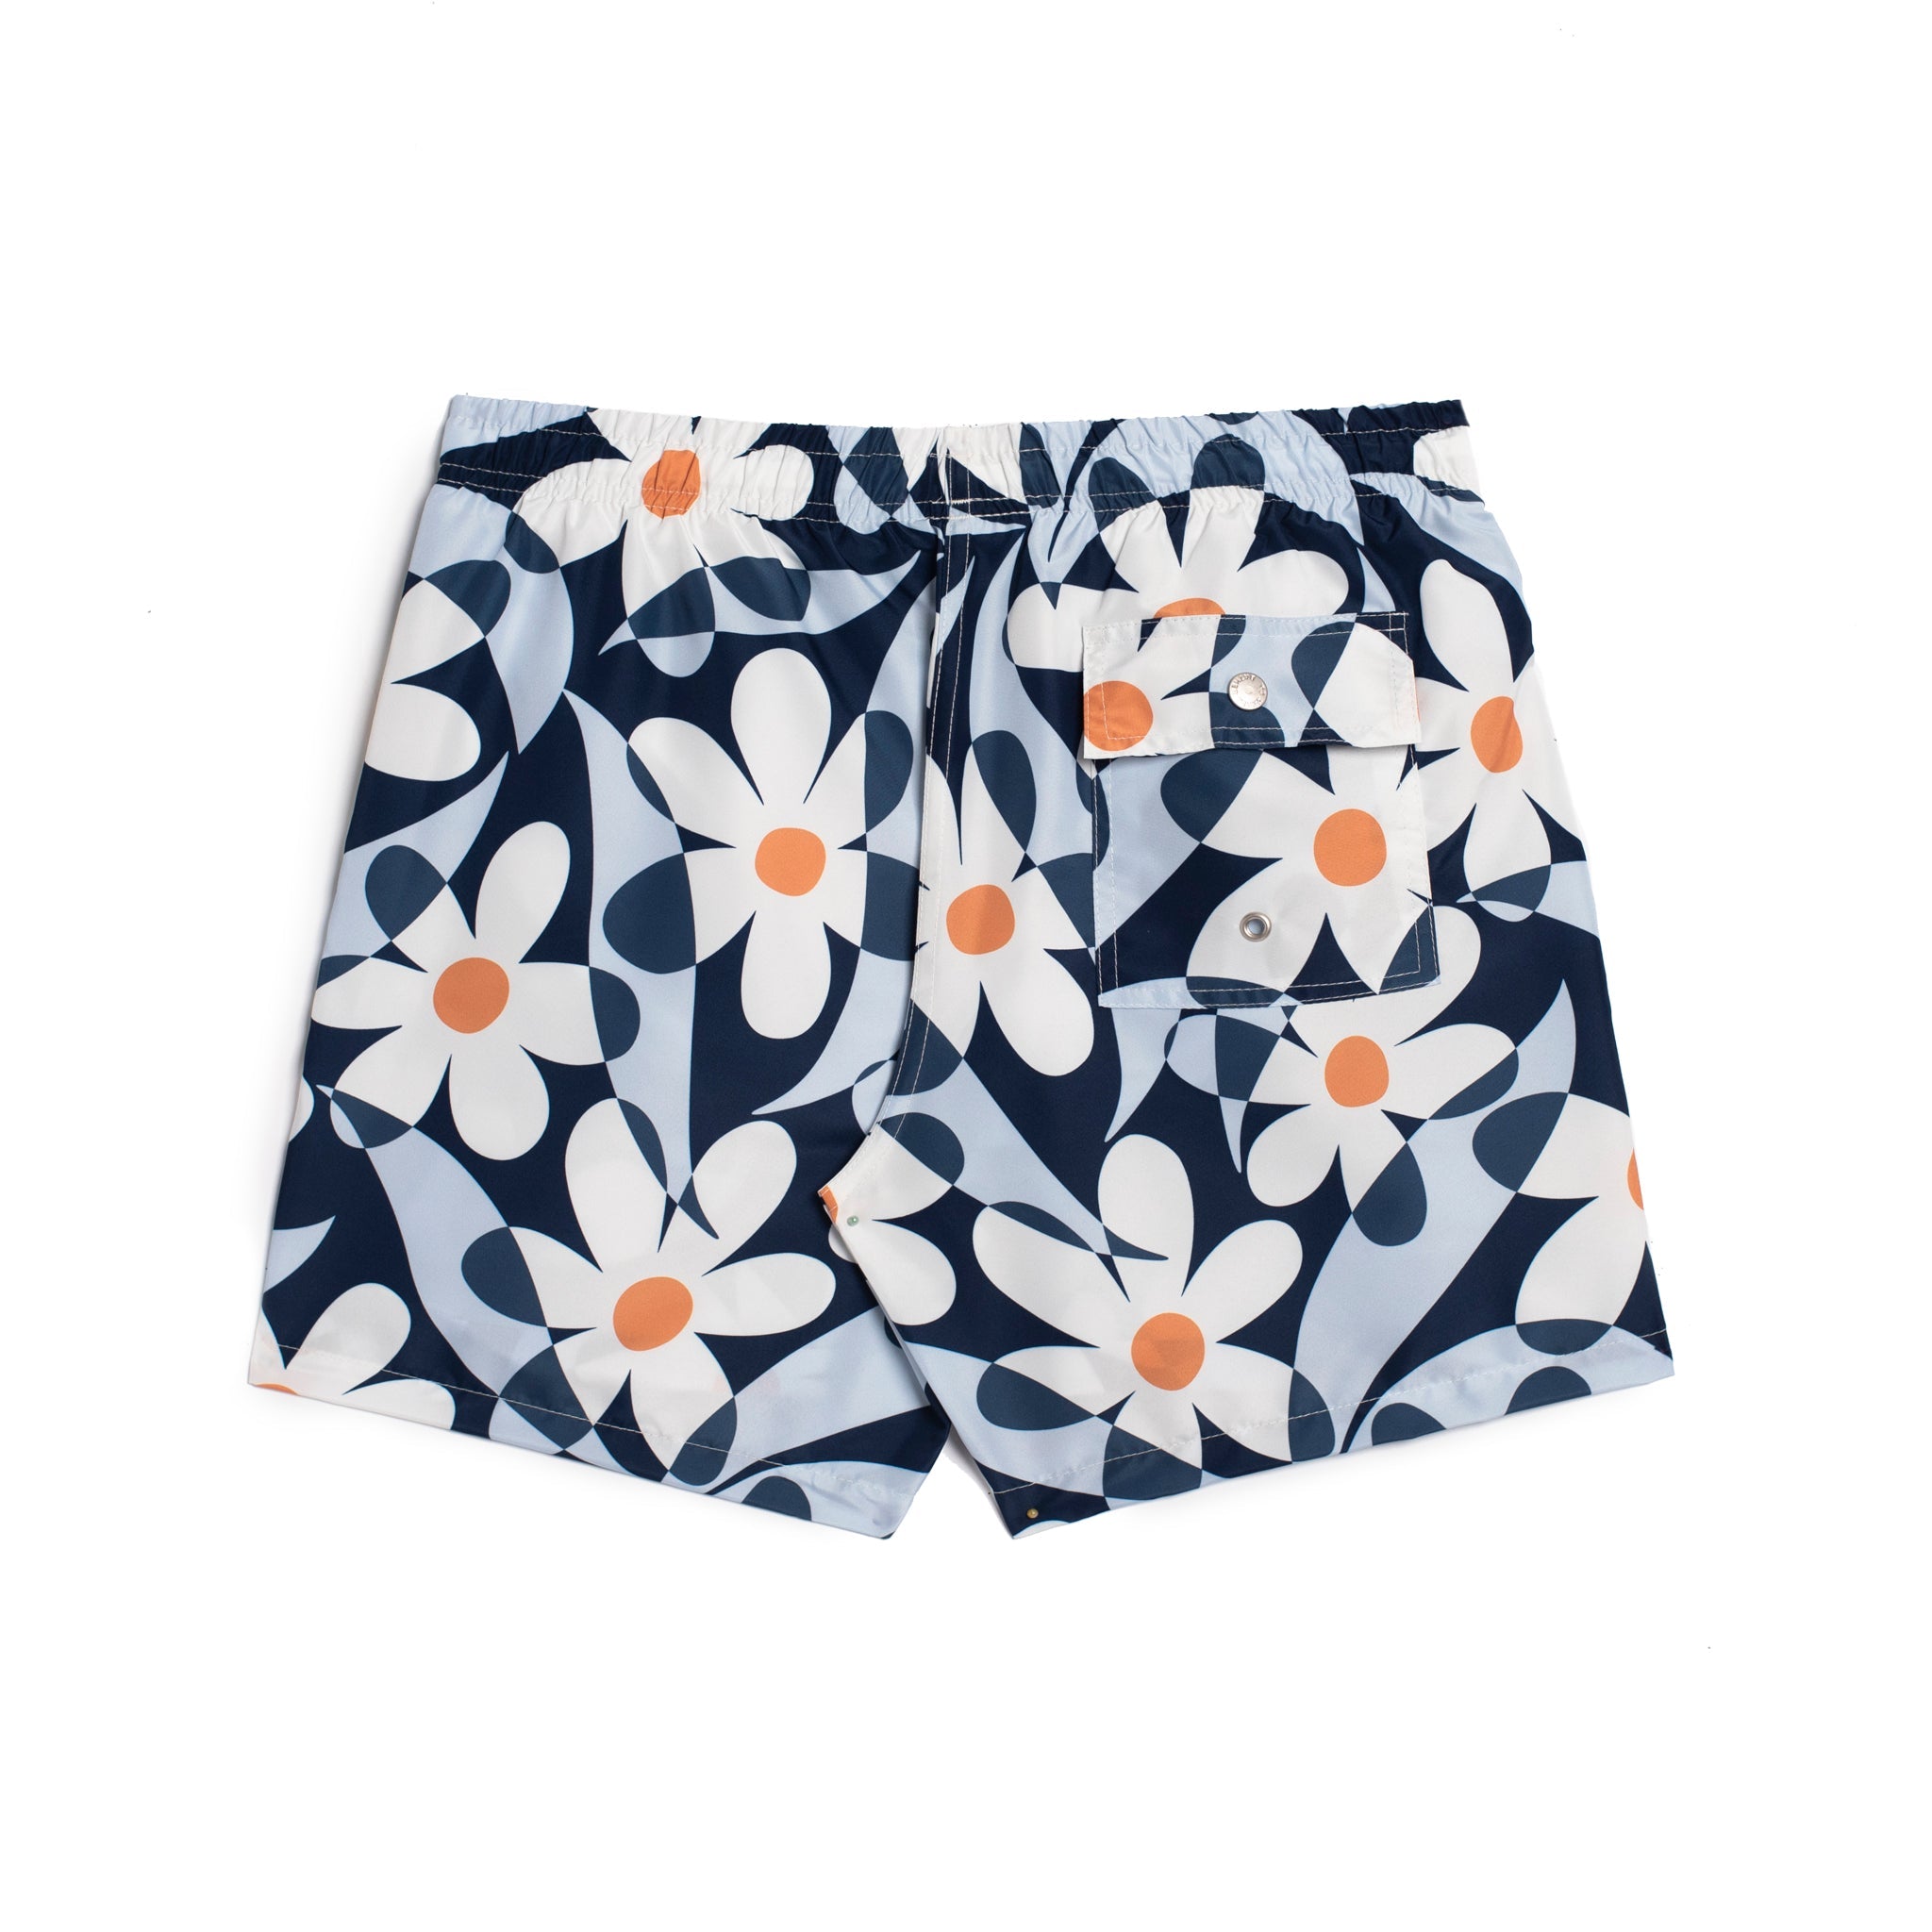 Rear view of blue Bather swim trunks with abstract daisy pattern